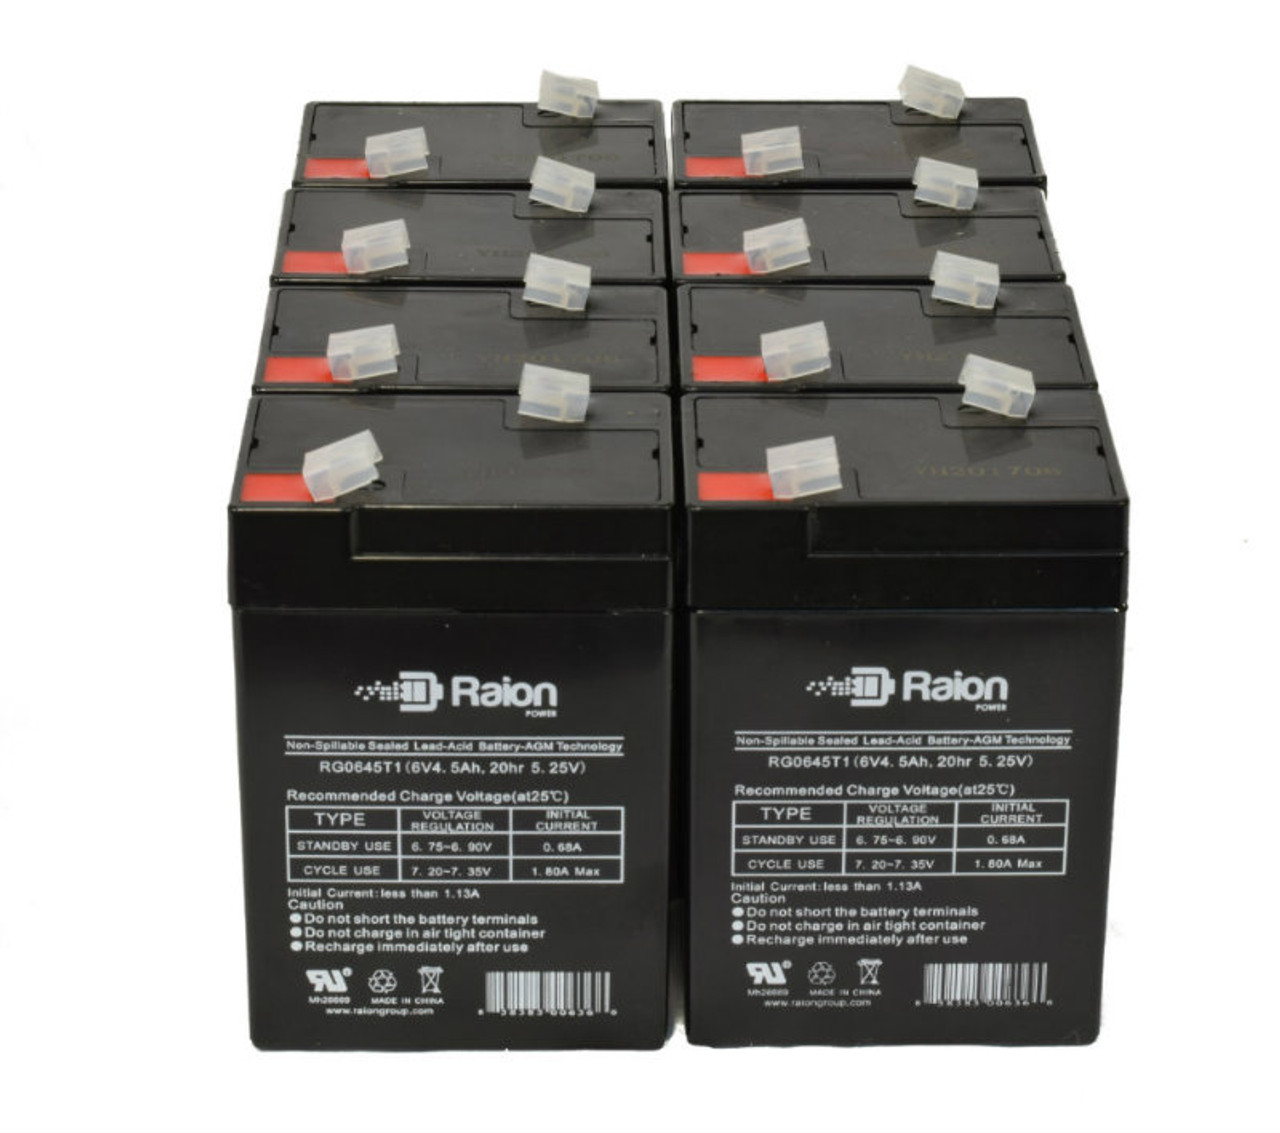 Raion Power 6V 4.5Ah Replacement Emergency Light Battery for Astralite 20-0008 - 8 Pack